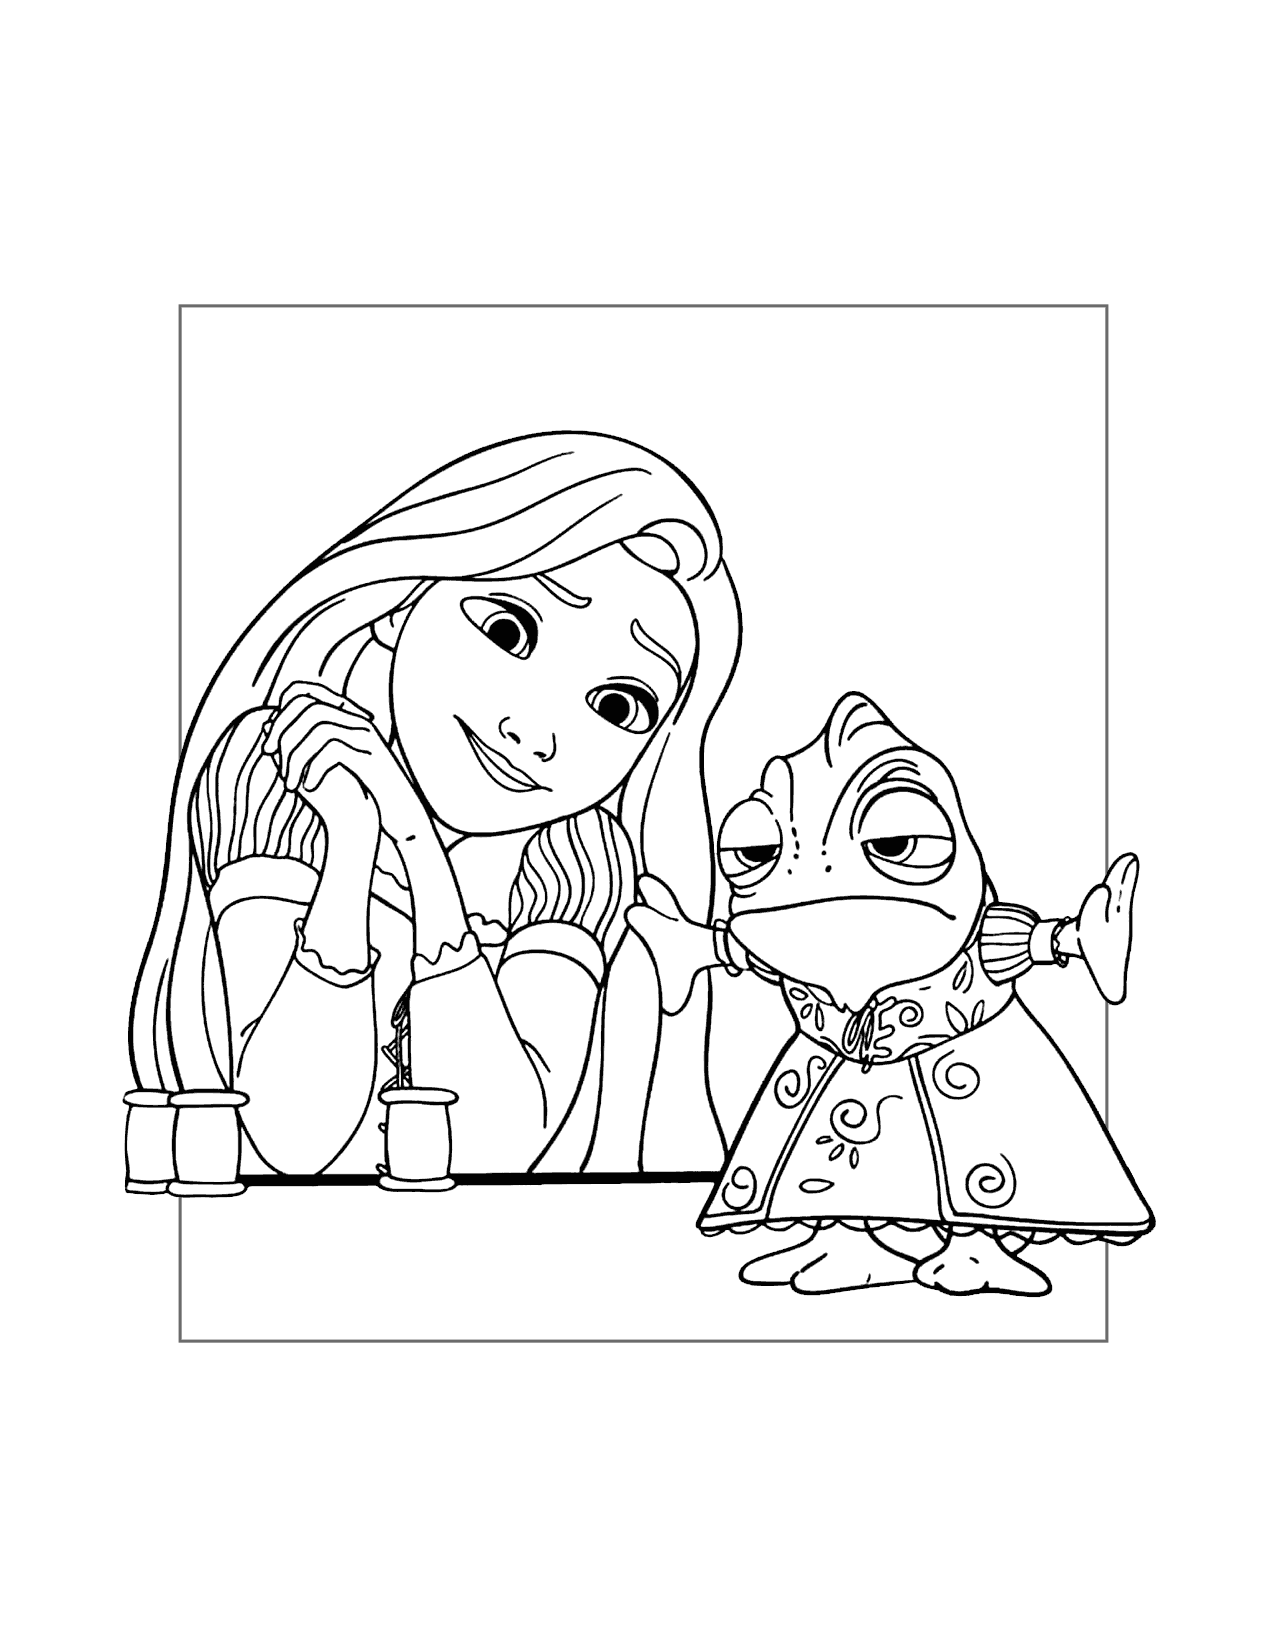 Cute Rapunzel And Pascal Coloring Page